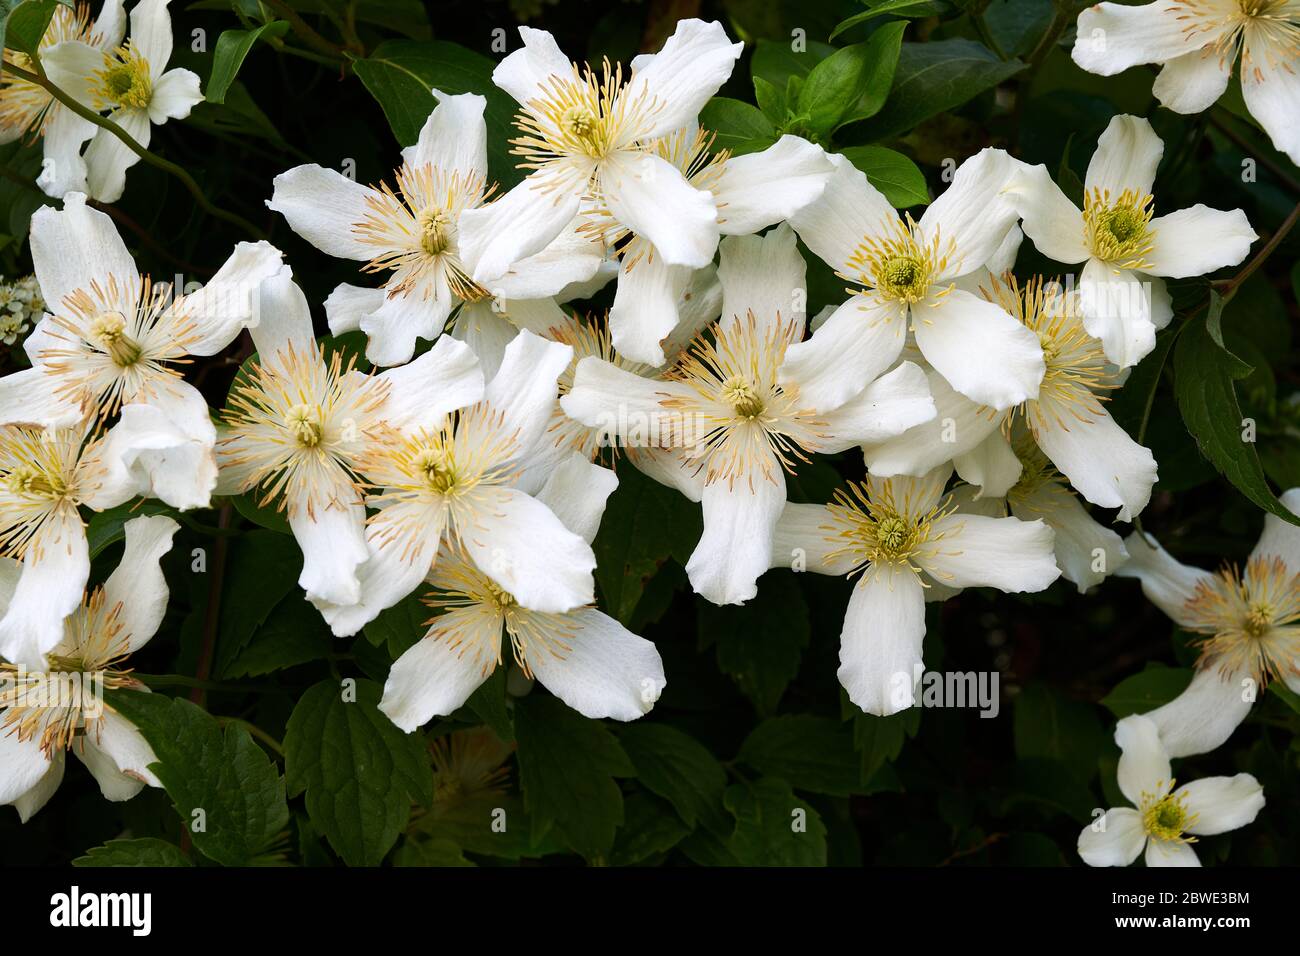 The white four petalled flowers of the clematis montana grandiflora climbing plant in full bloom. Stock Photo